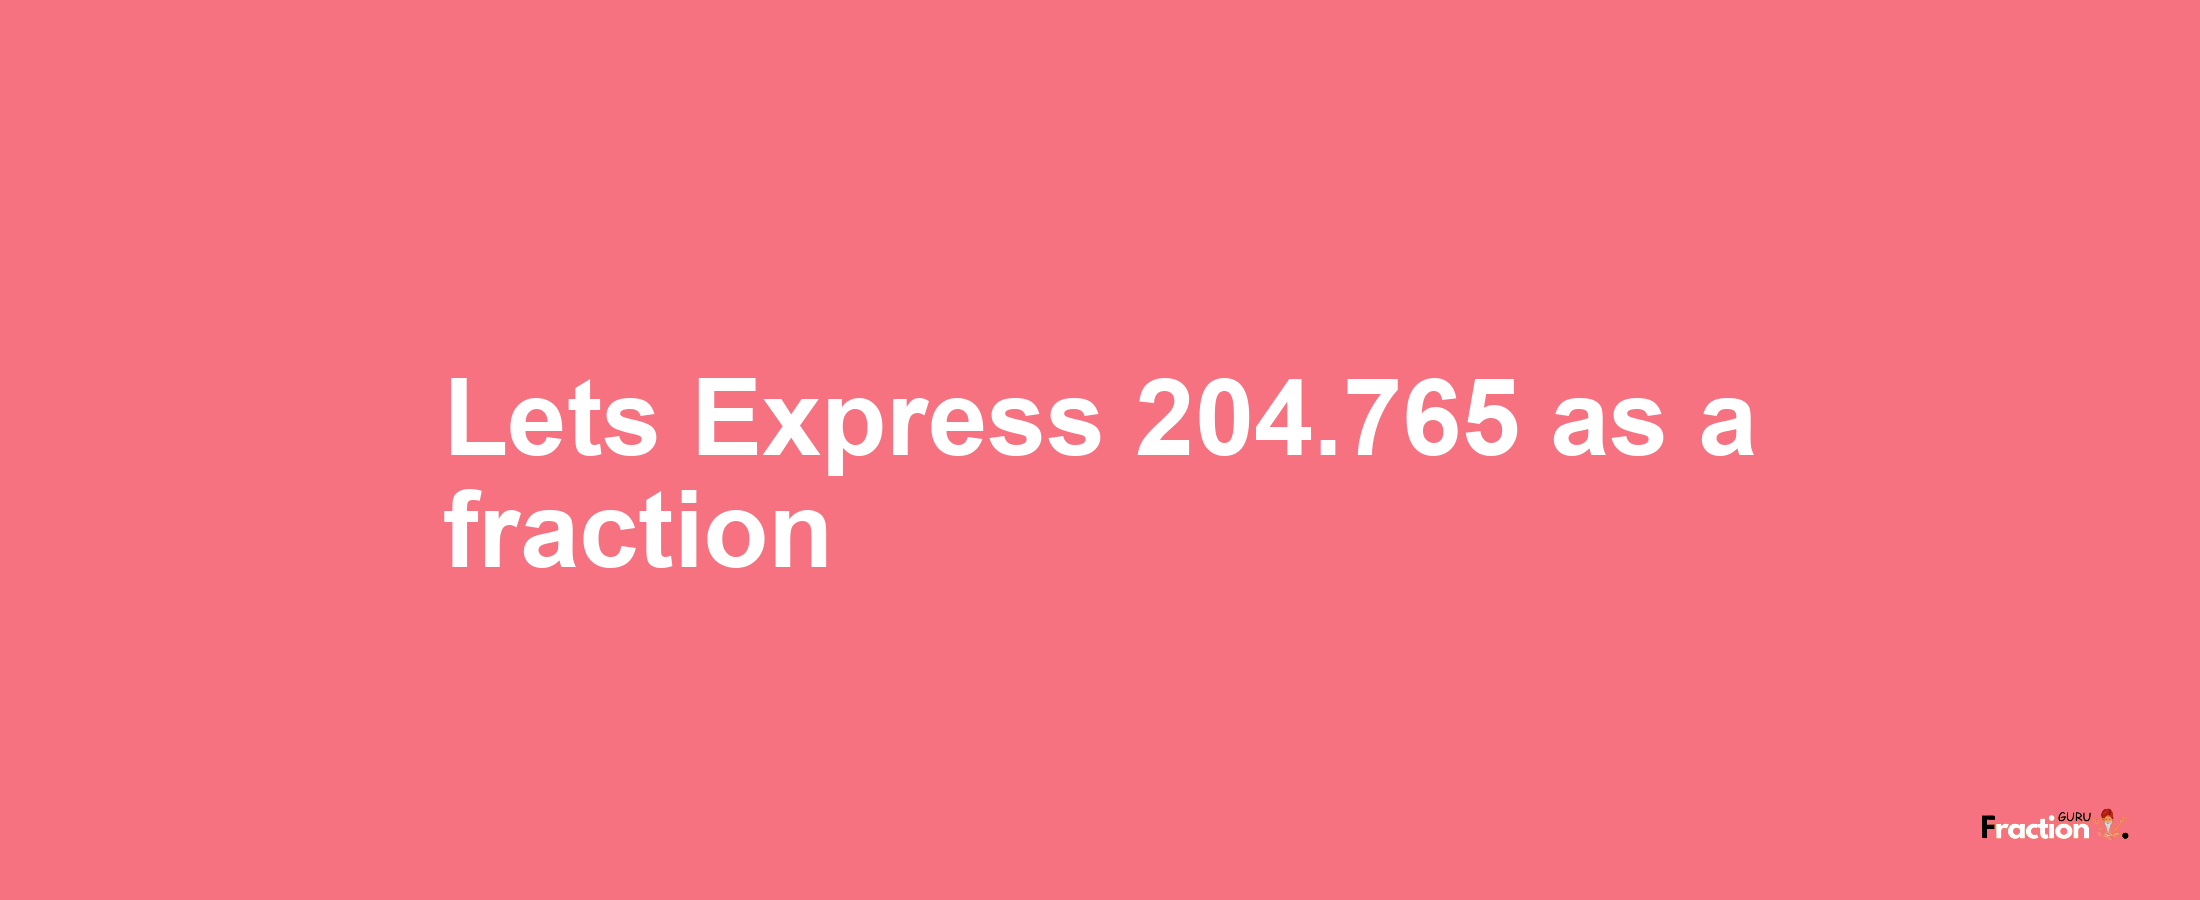 Lets Express 204.765 as afraction